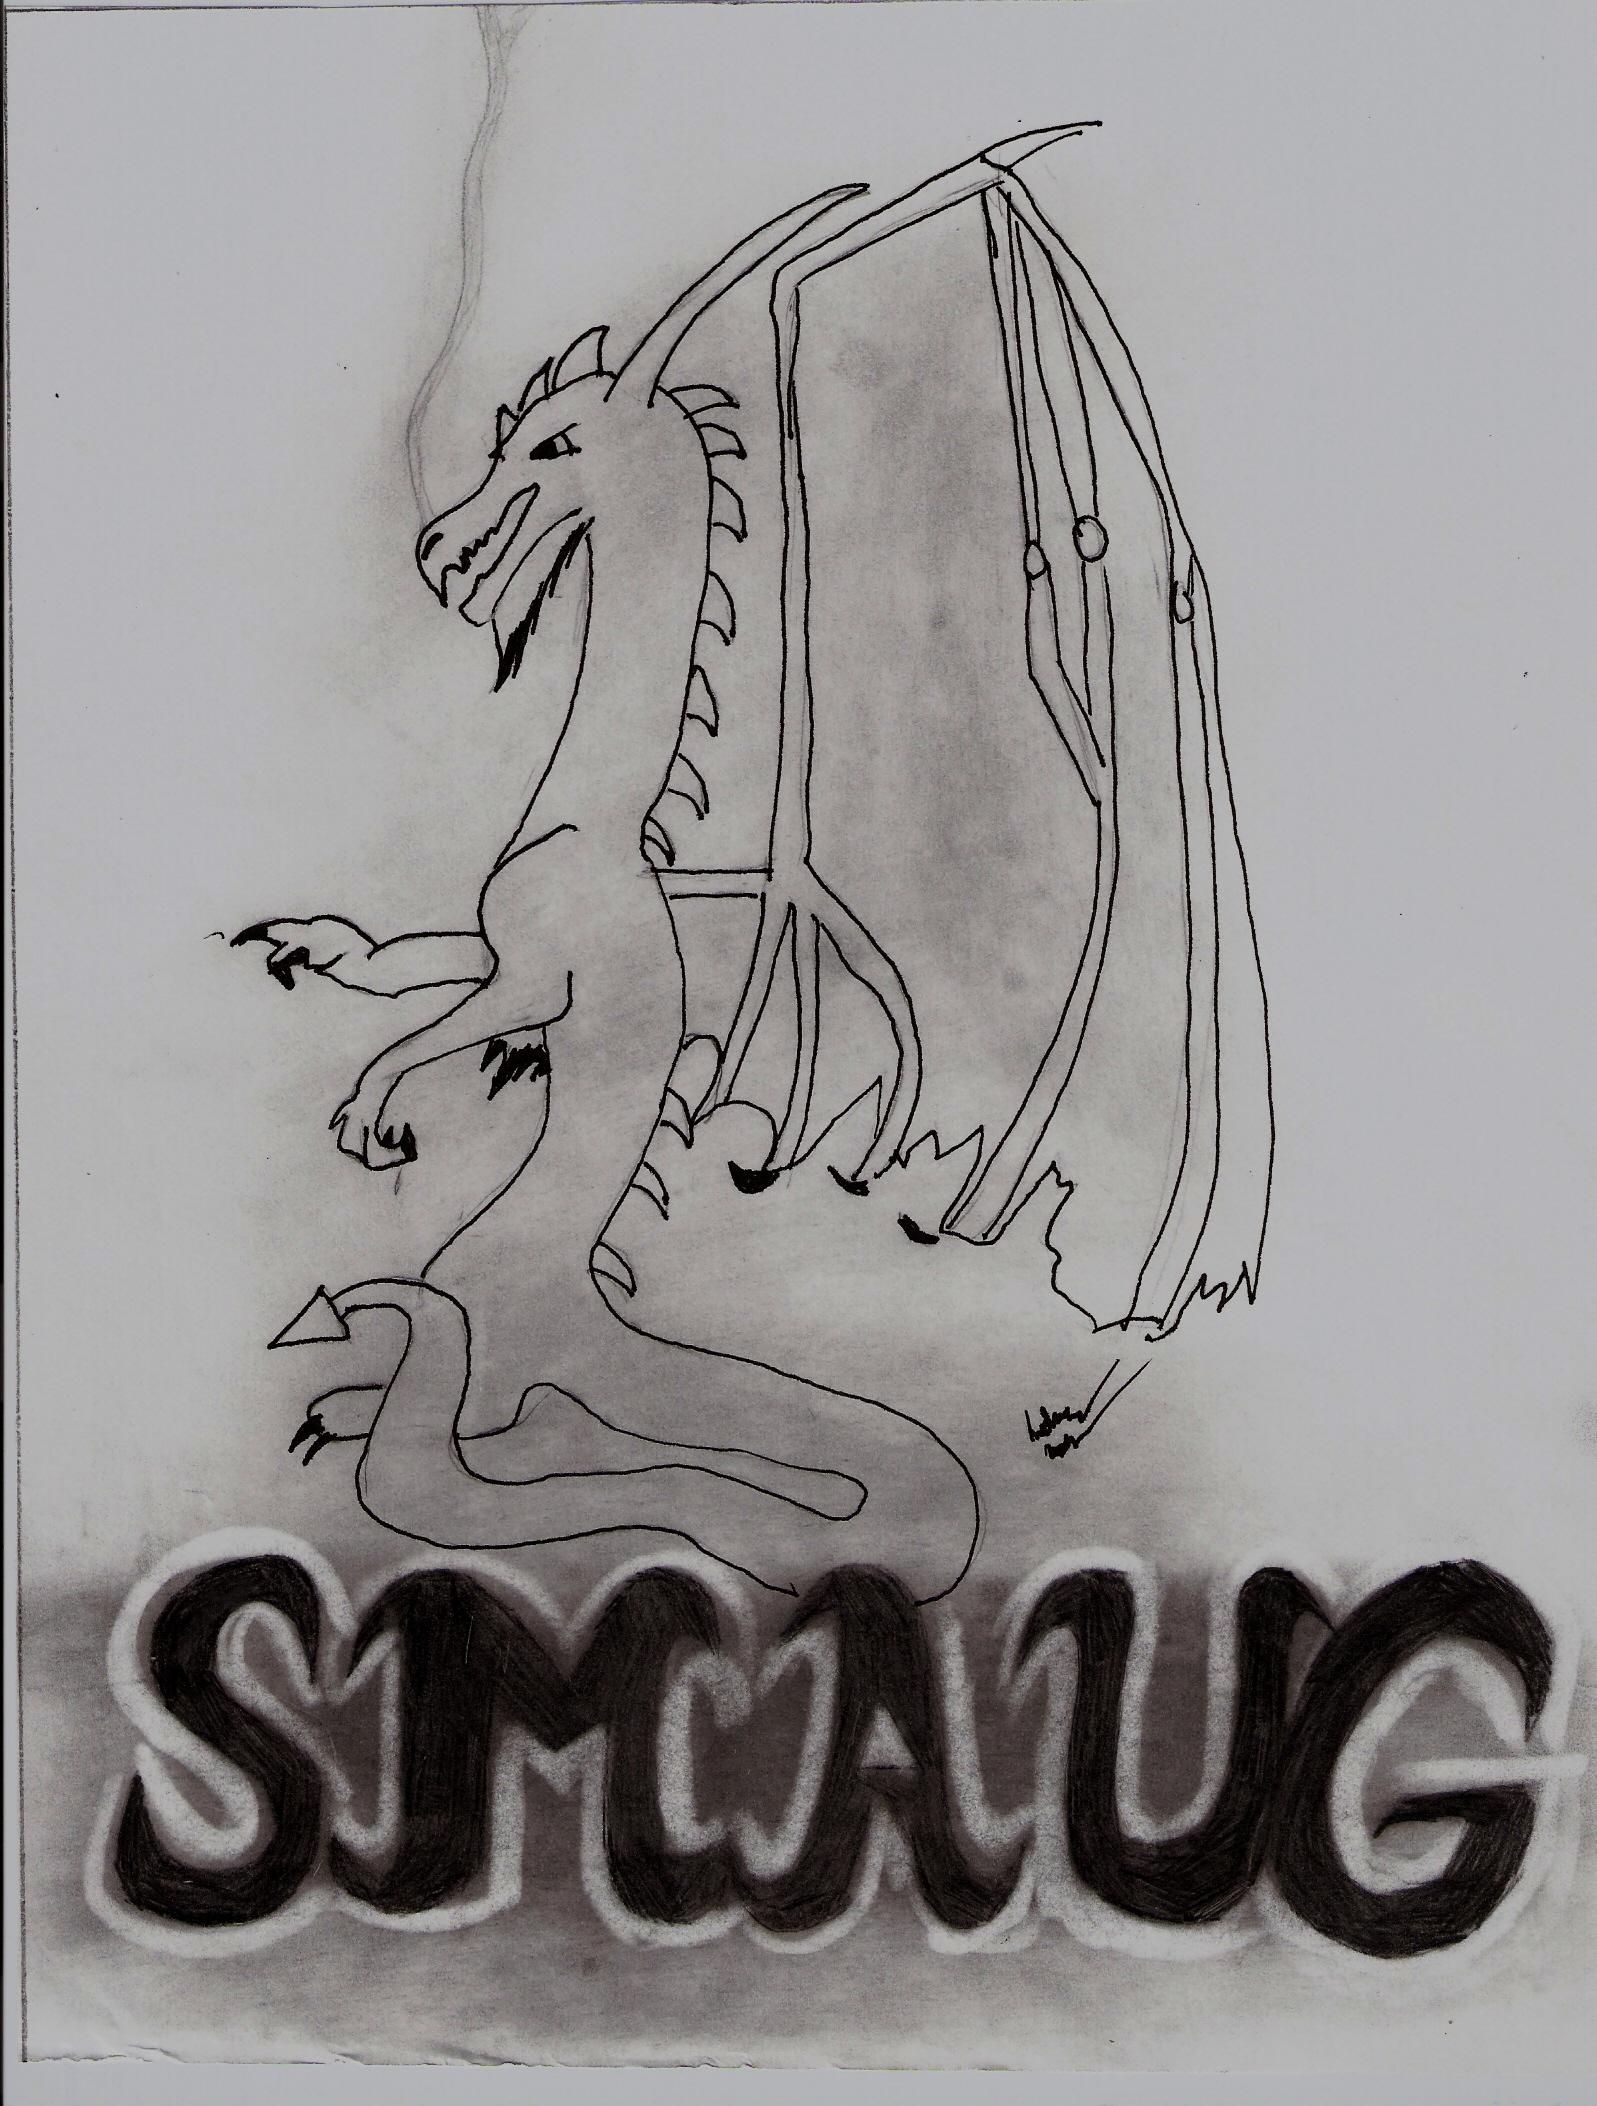 A Dwarven Fear - Smaug by 4charliepace4